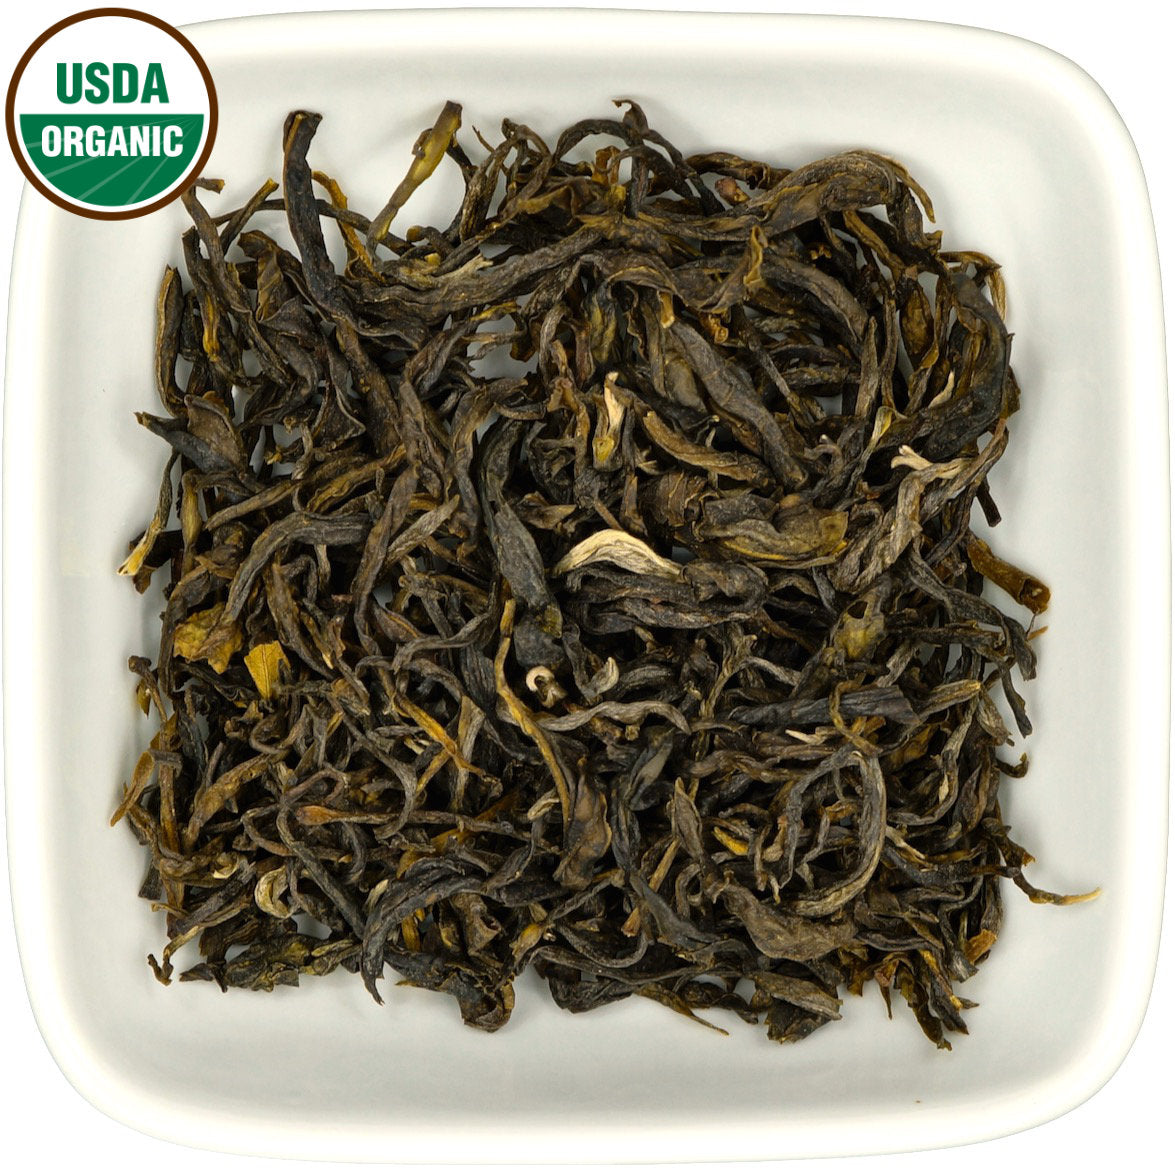 Organic Colombian Roasted Green dry leaf view